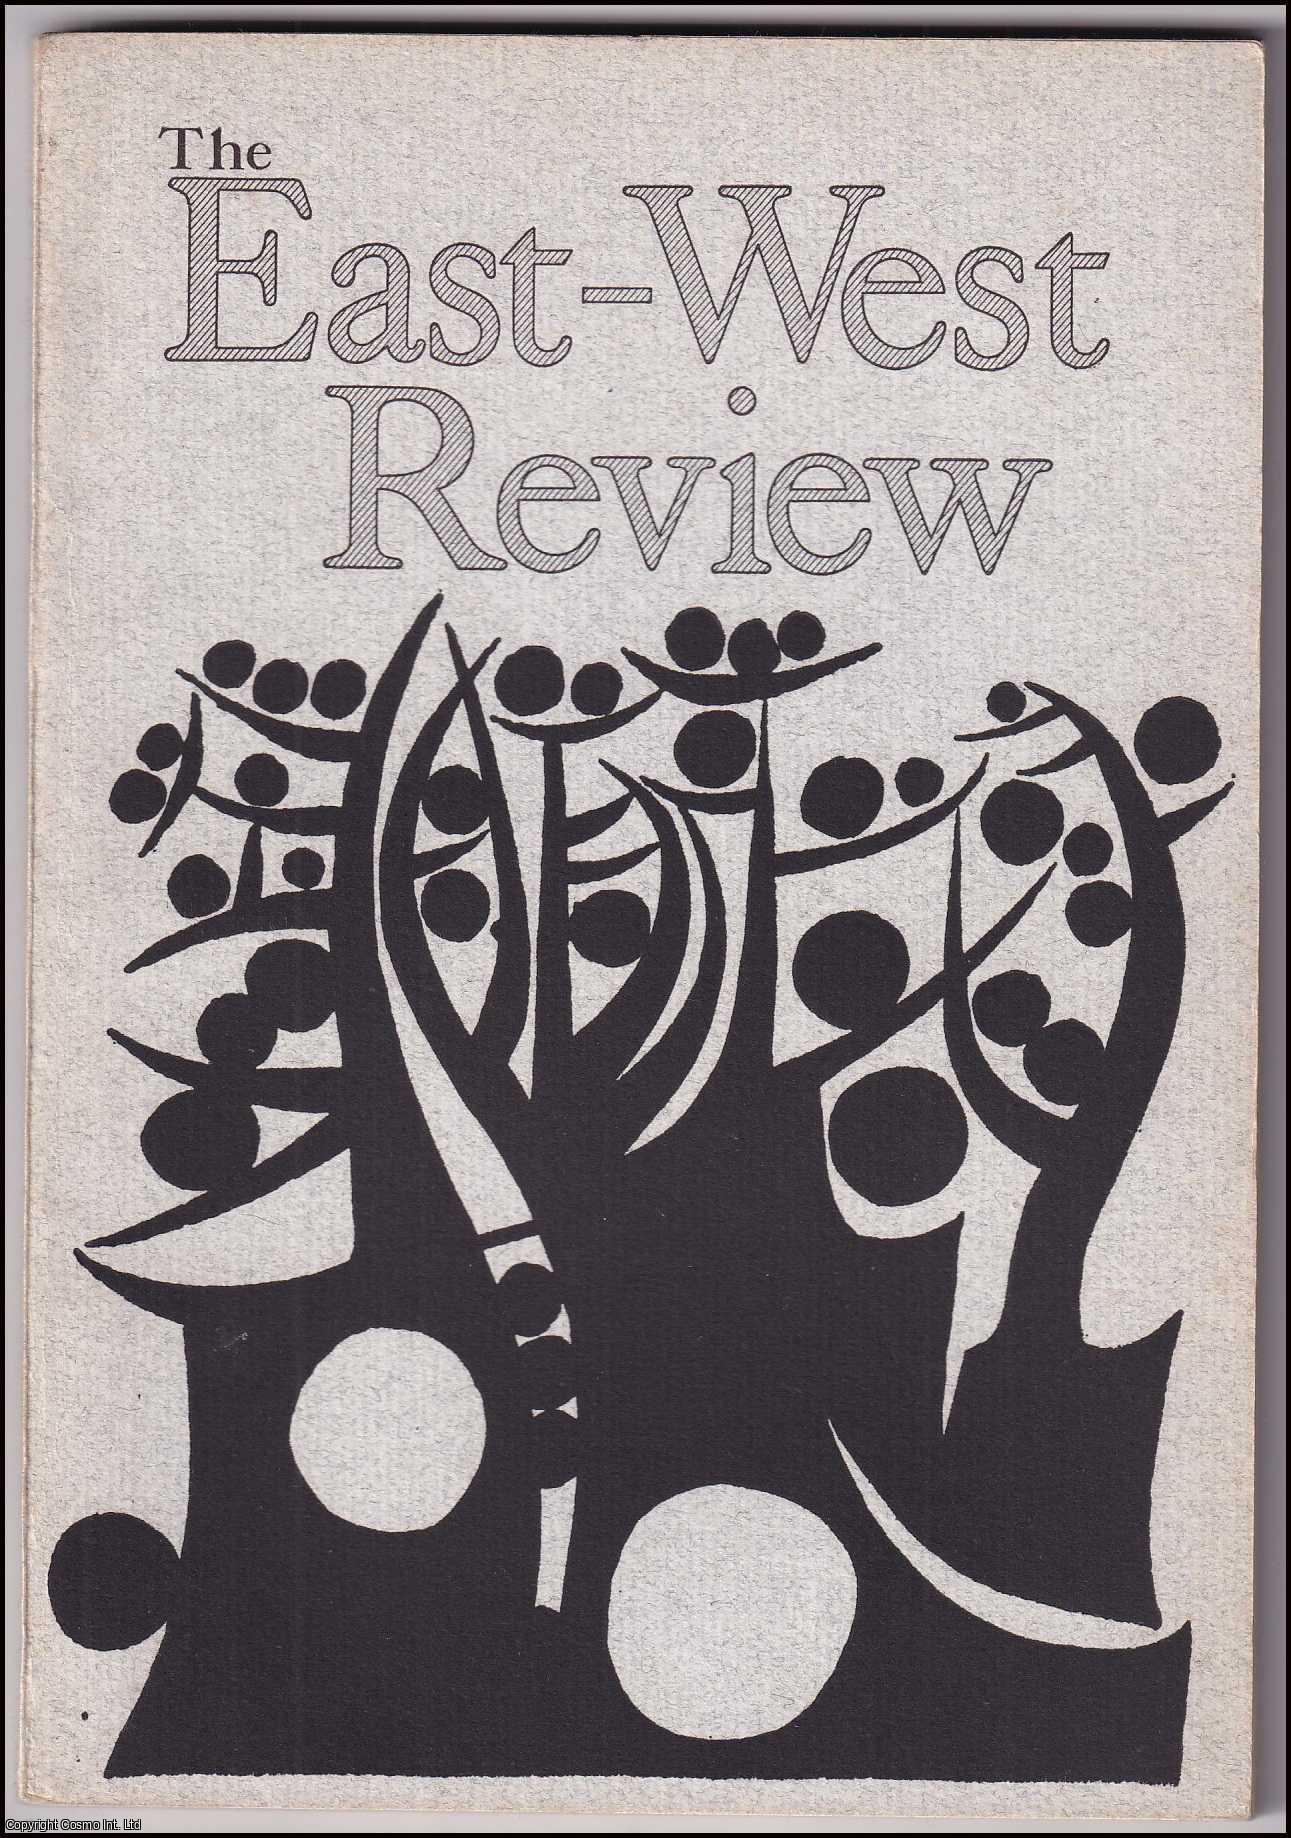 Edited by Naozo Ueno - The East-West Review. Spring 1964. Volume 1, Number 1. Includes Walt Whitman and the Death of President John F. Kennedy. See pictures for contributors.